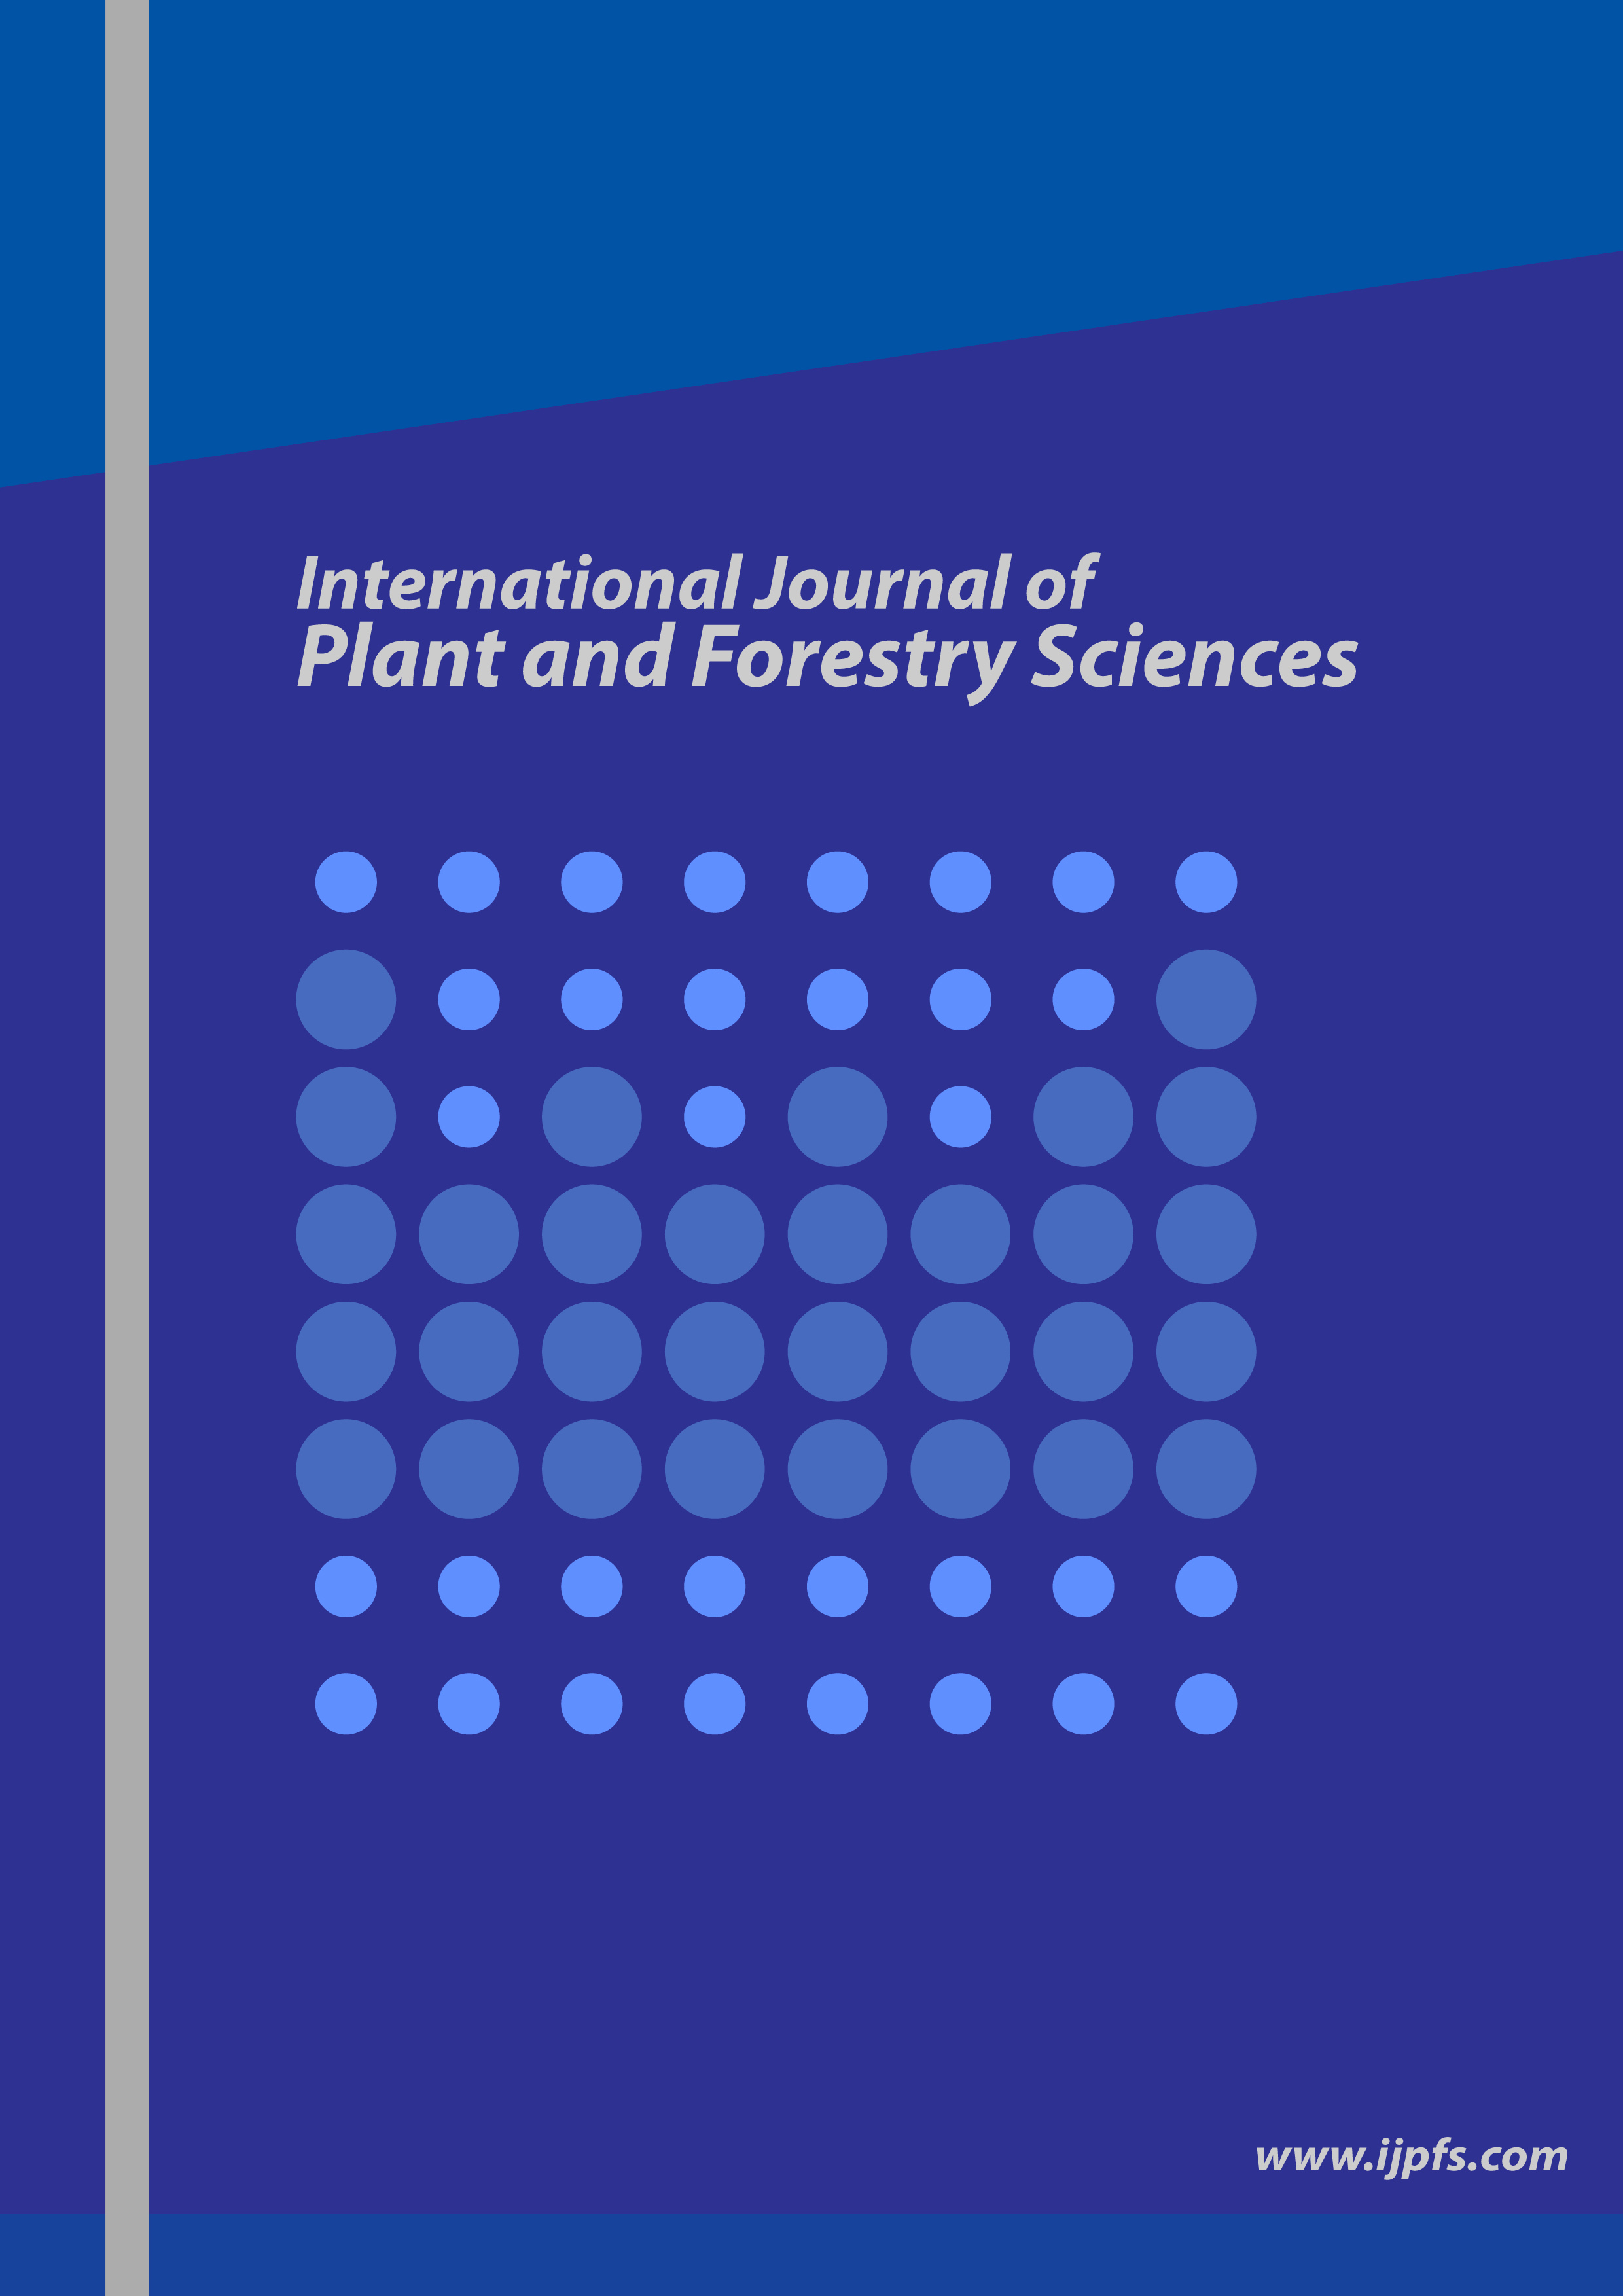 International Journal of Plant and Forestry Sciences